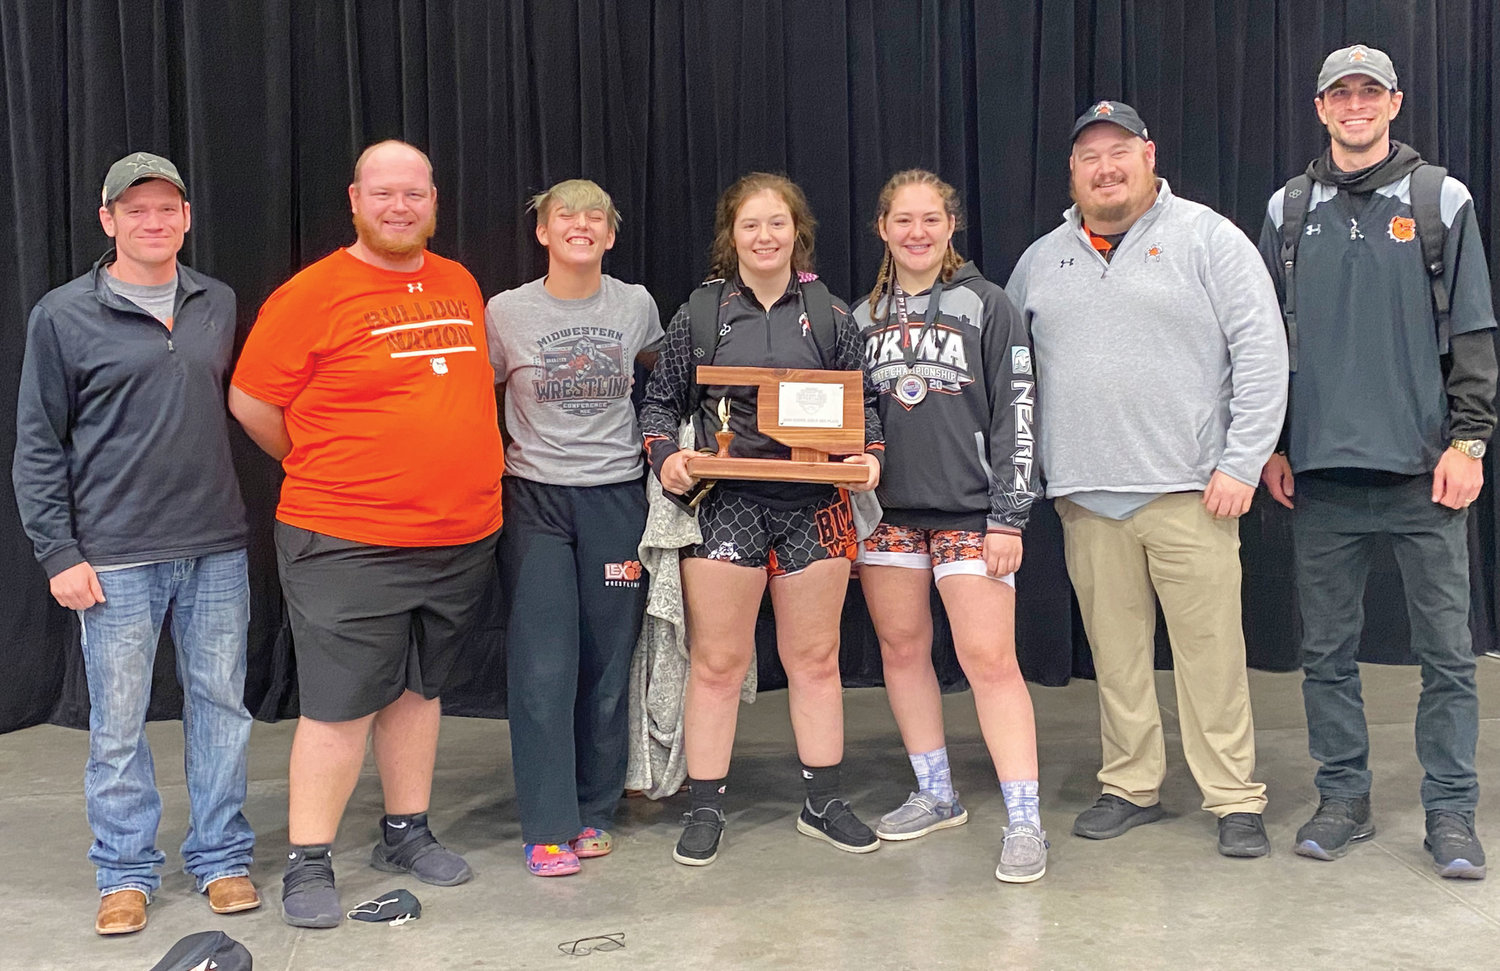 With the third place trophy for the girls division of the Midwestern Conference Tournament last weekend are, from left, Coach Buchanan, Coach Somers, Izzy Pack, Cilee Turner, Elexa Collins, Coach Garrett and Coach McKay.